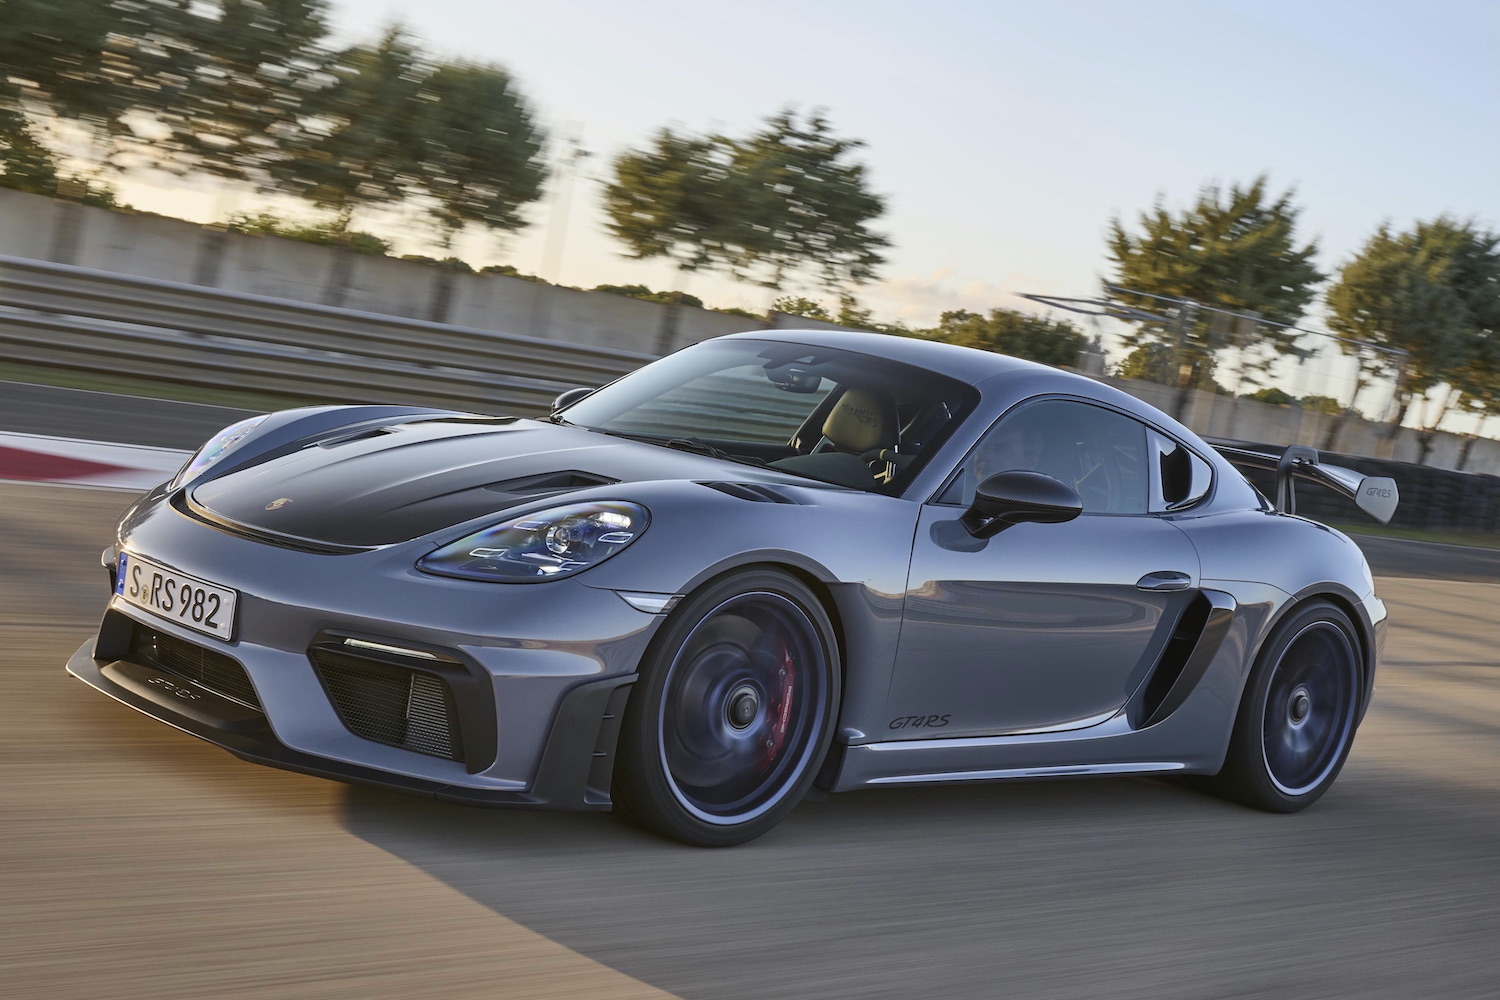 Porsche 718 Cayman GT4 RS driving fast on track from front end driver's side.